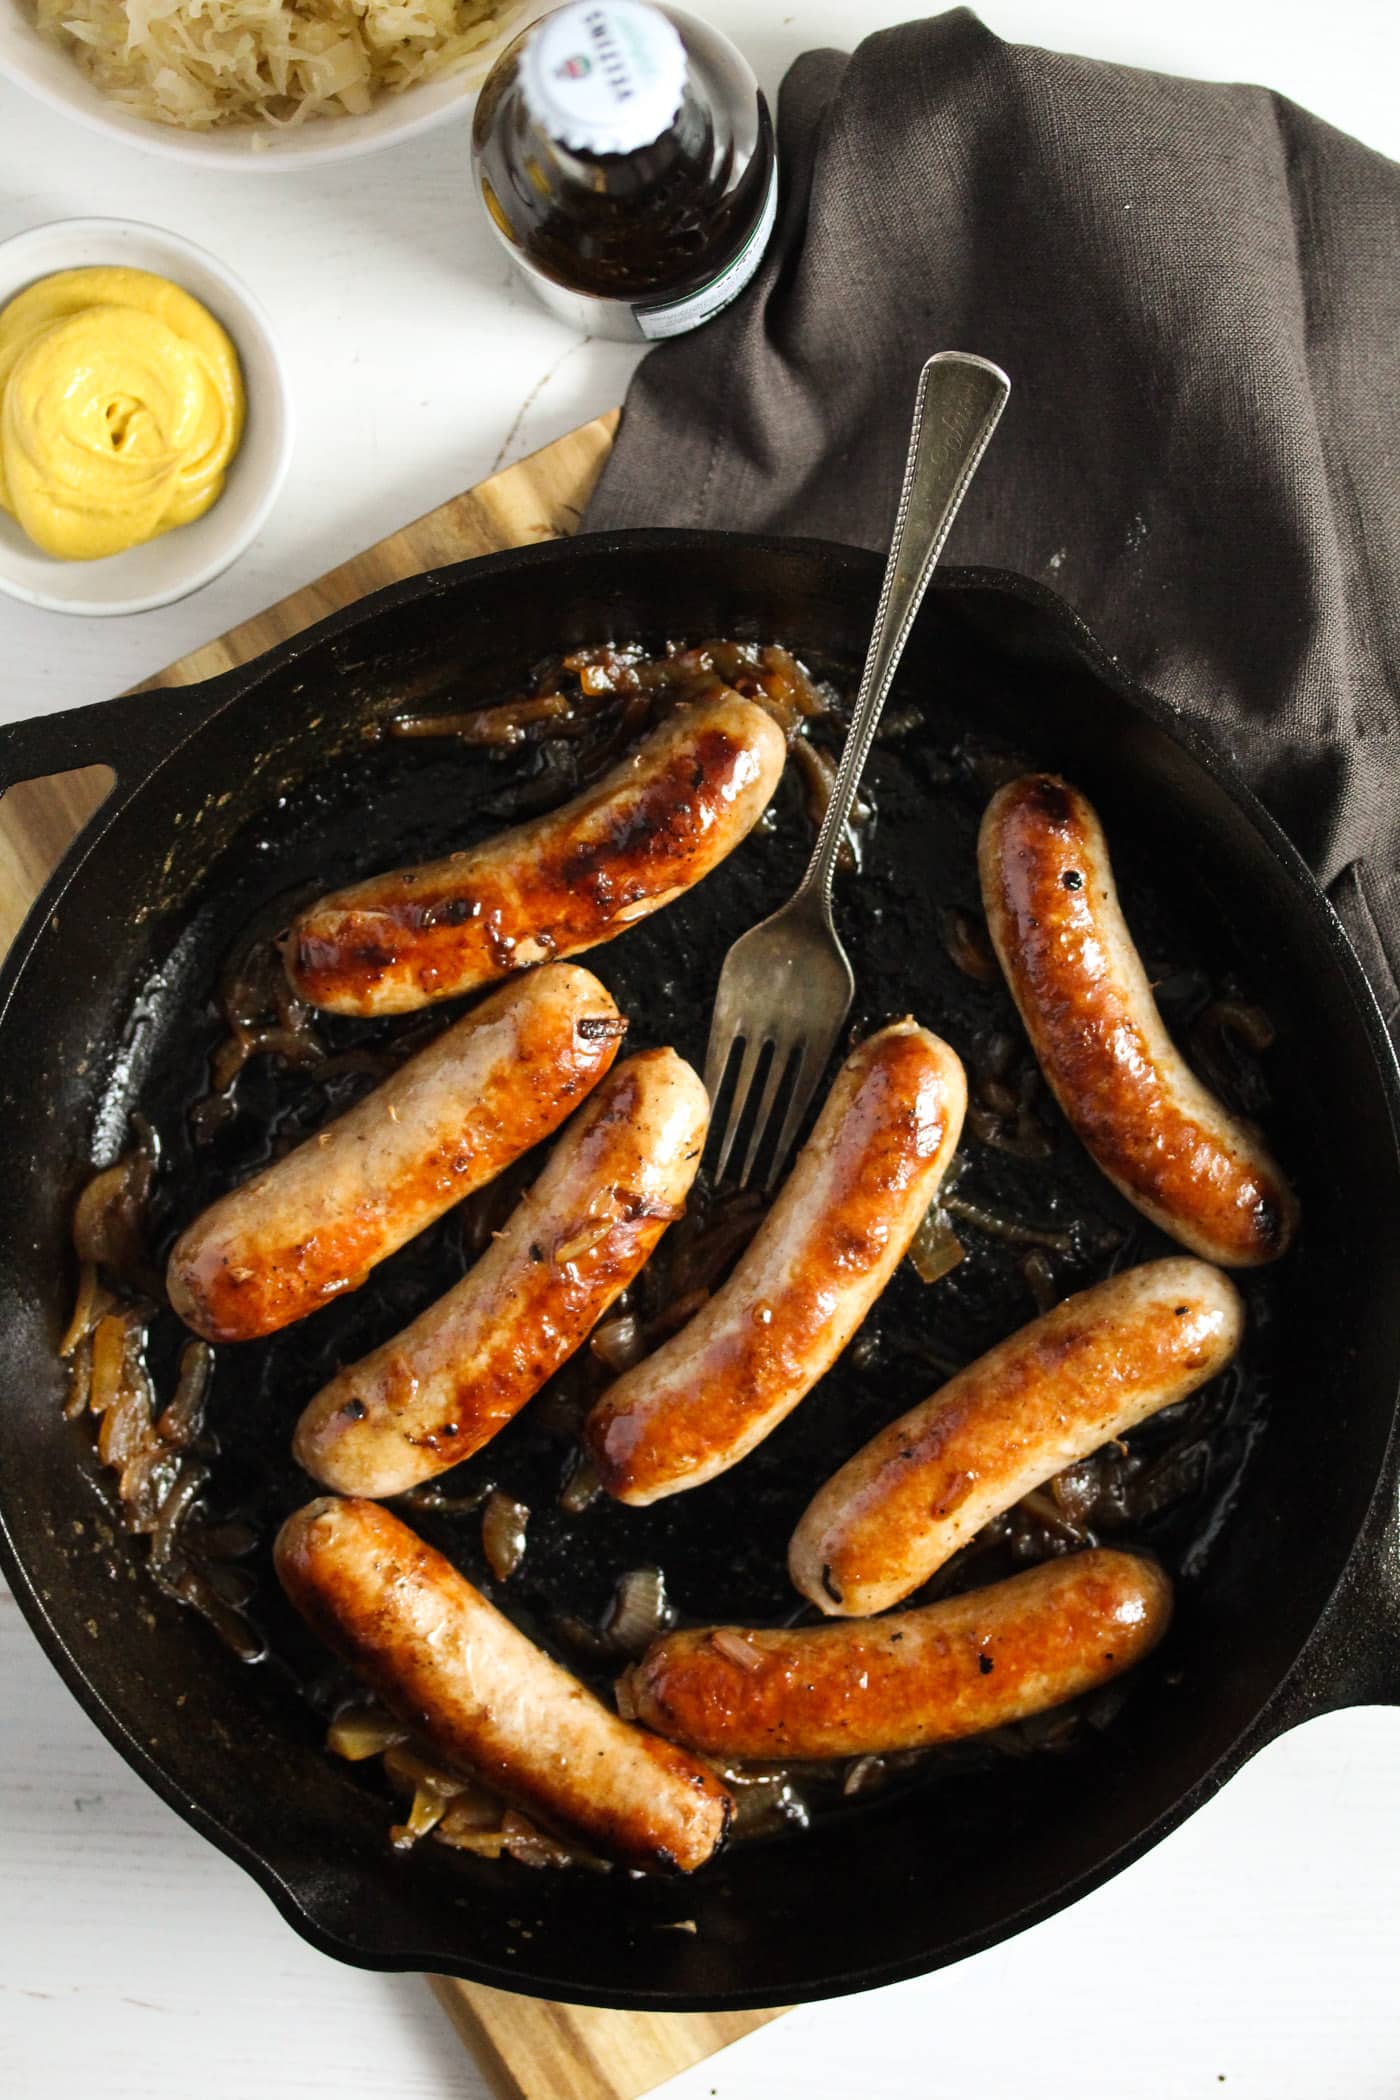 brats in a pan served with a bowl of mustard.